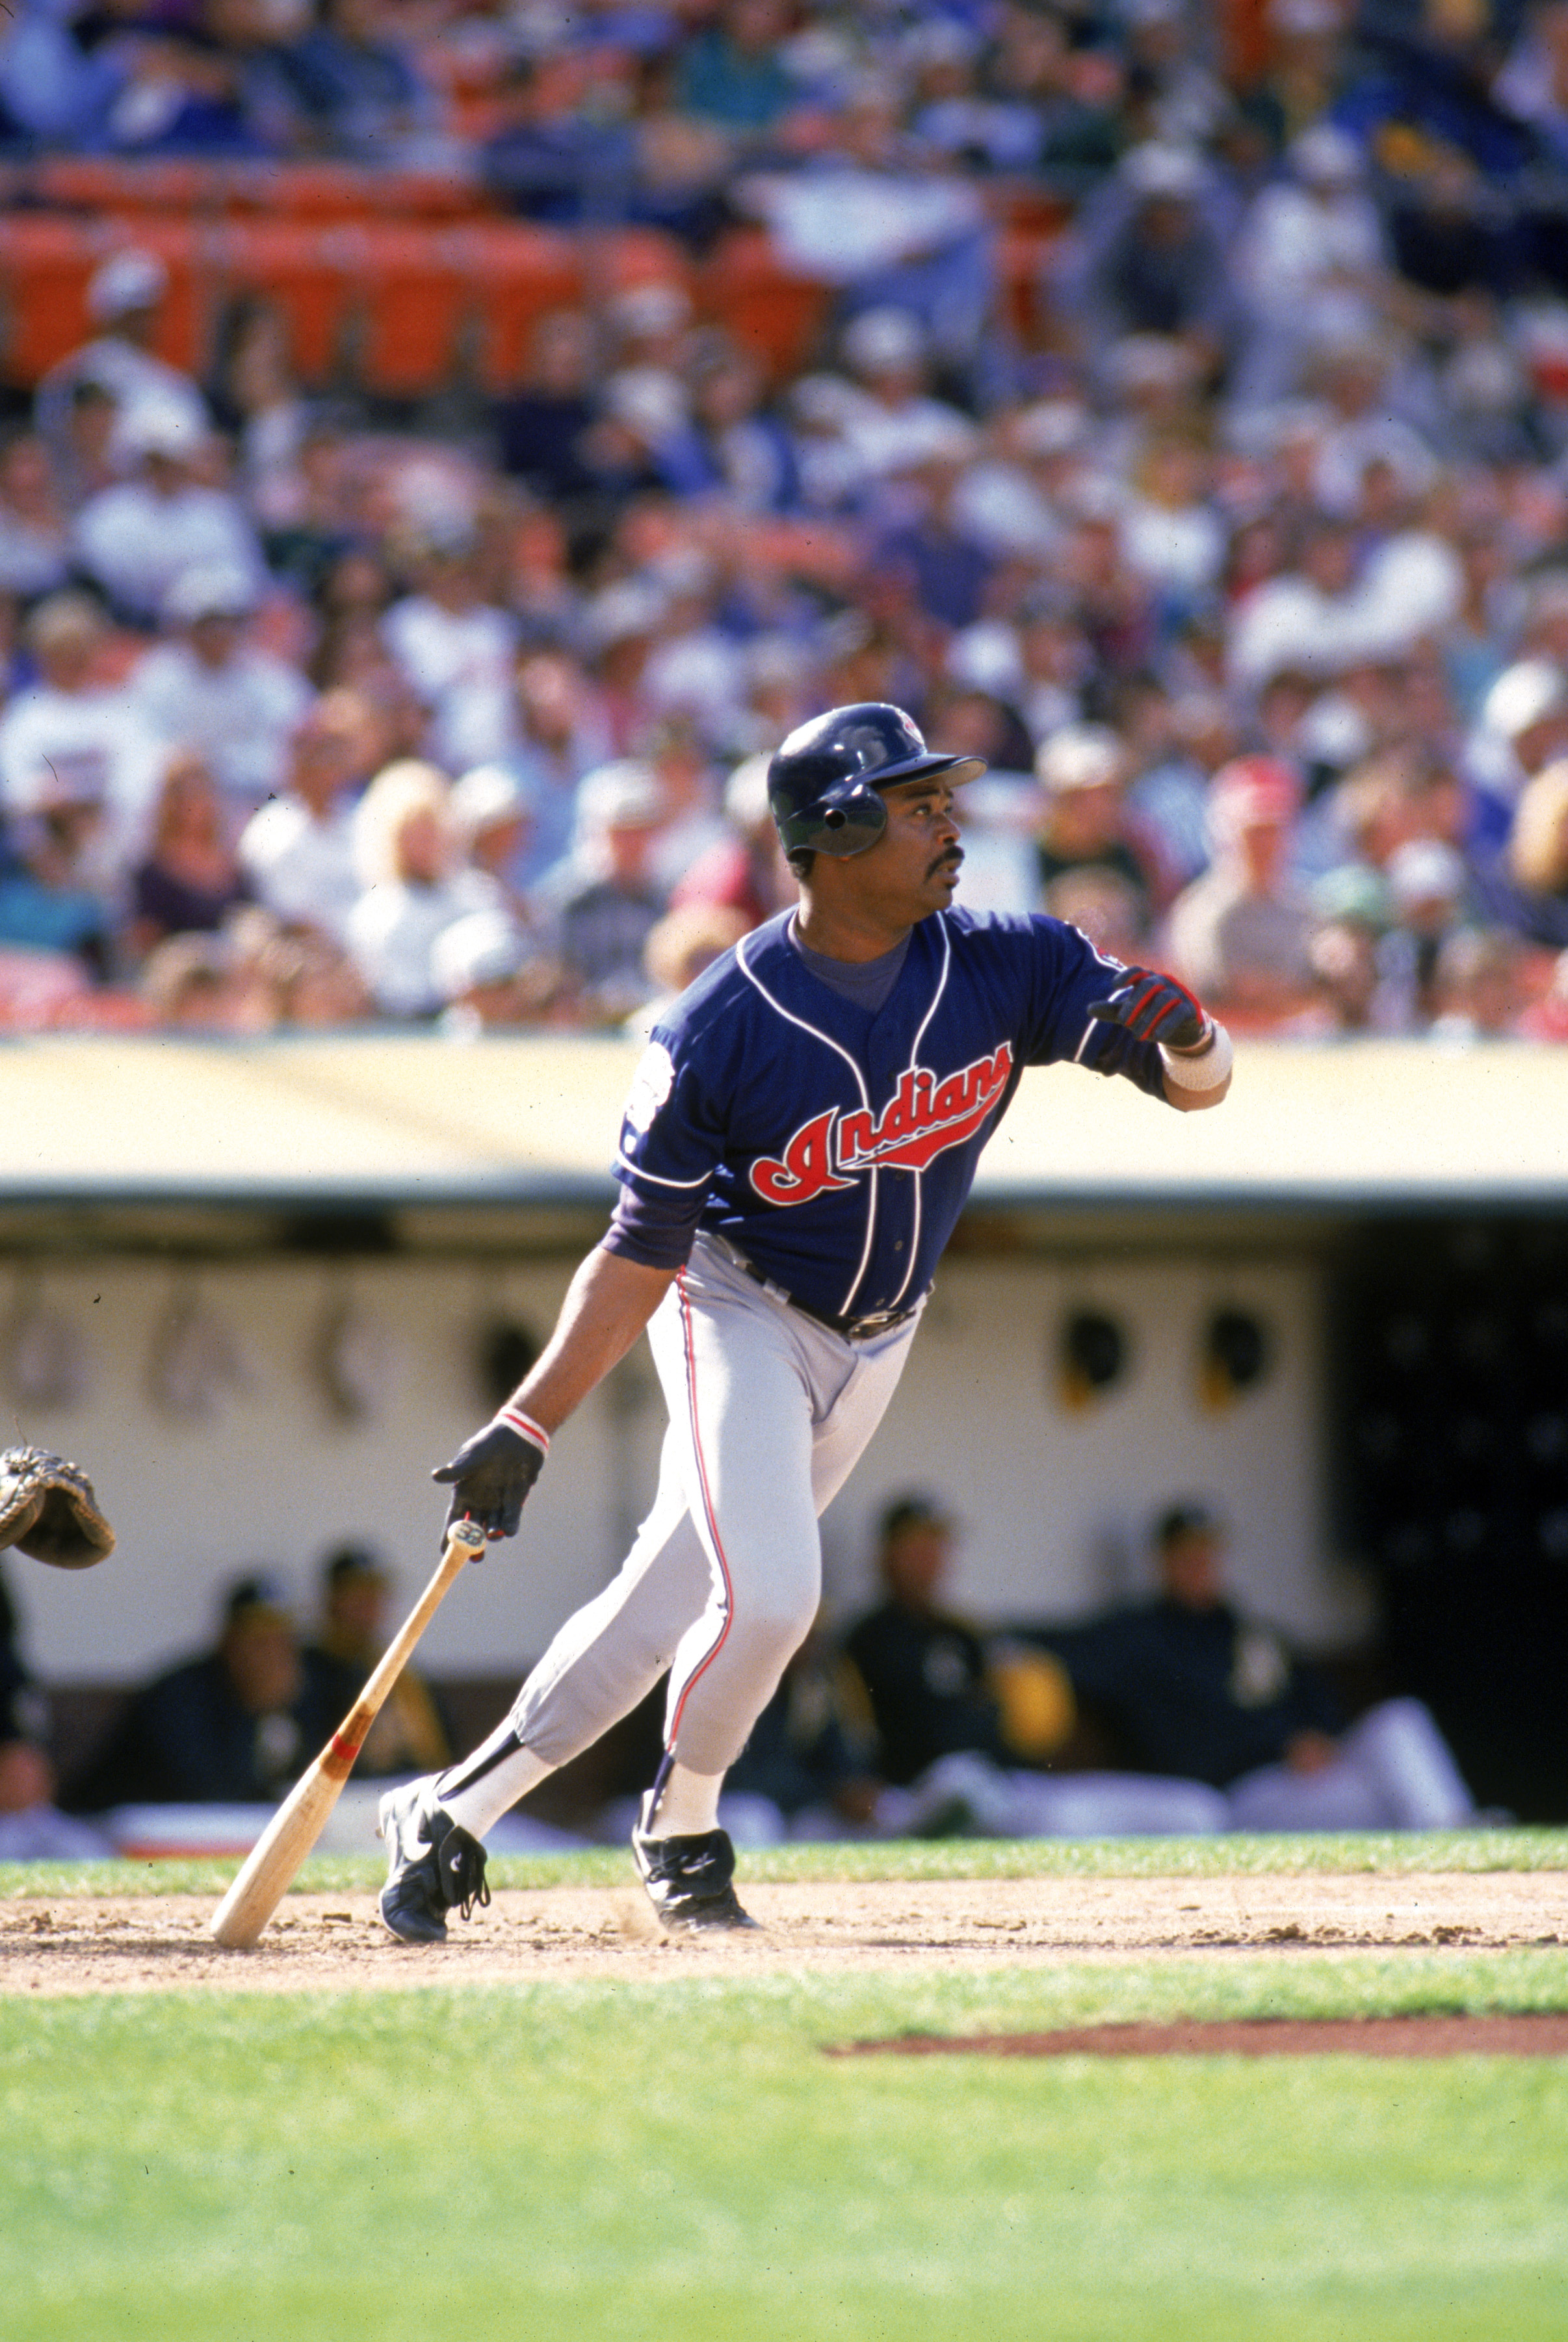 CITYSTATE - JUNE 5:  Eddie Murray #33 of the Cleveland Indians watches the flight of his hit during a game against the Oakland Athletics at Oakland Alameda County Stadium on June 5, 1994 in Oakland, California. (Photo by Otto Greule Jr/Getty Images)